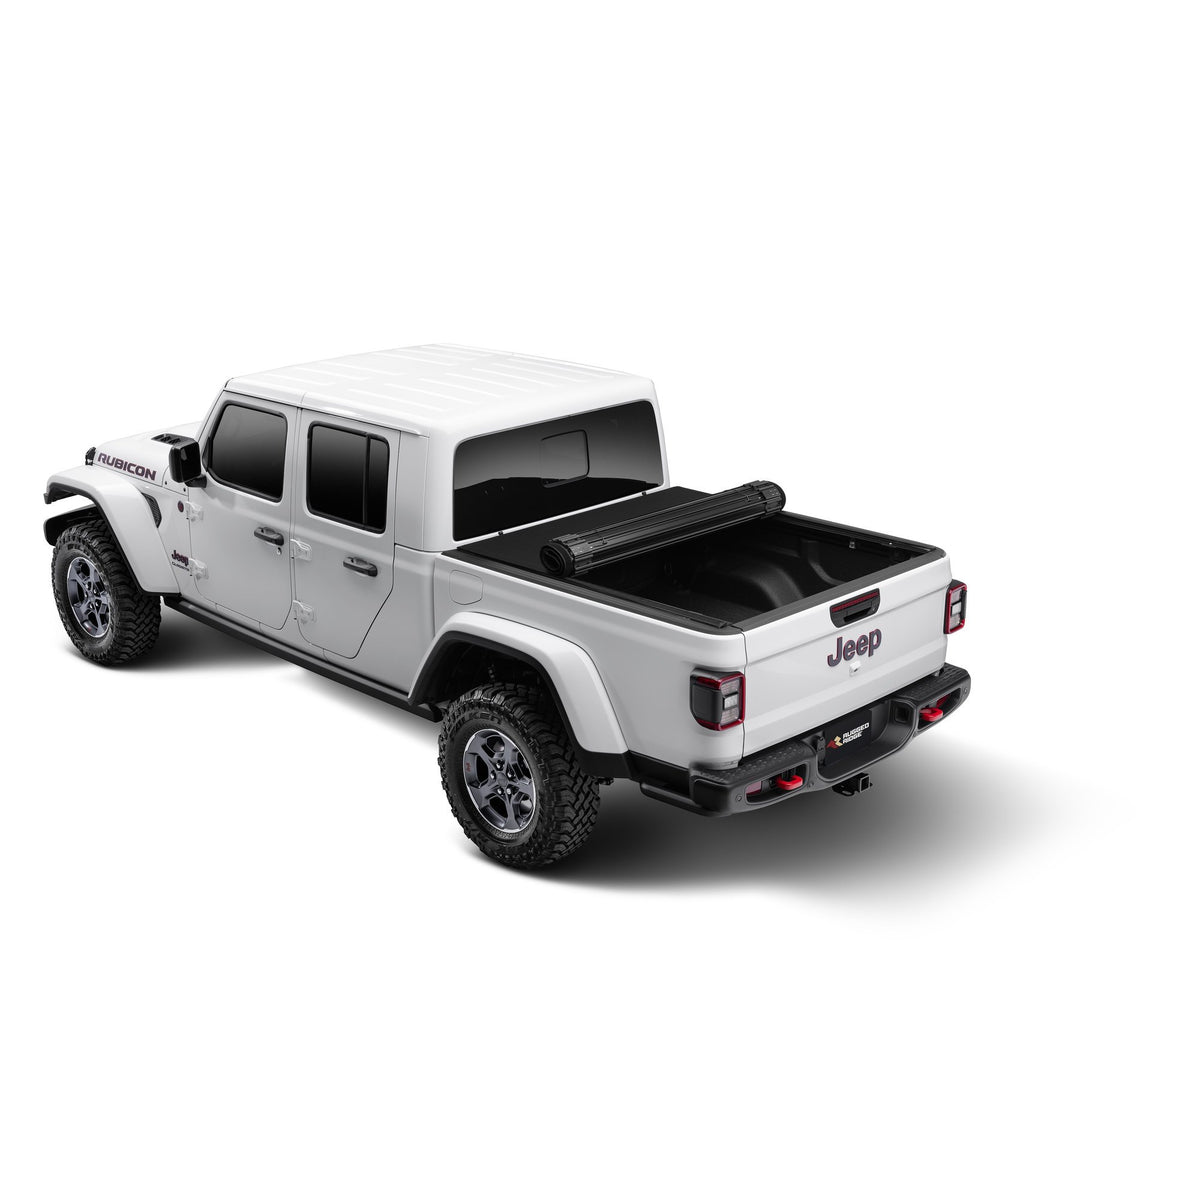 Rugged Ridge 13550.23 Armis HARD Rolling Bed Cover for 2020 Jeep Gladiator JT